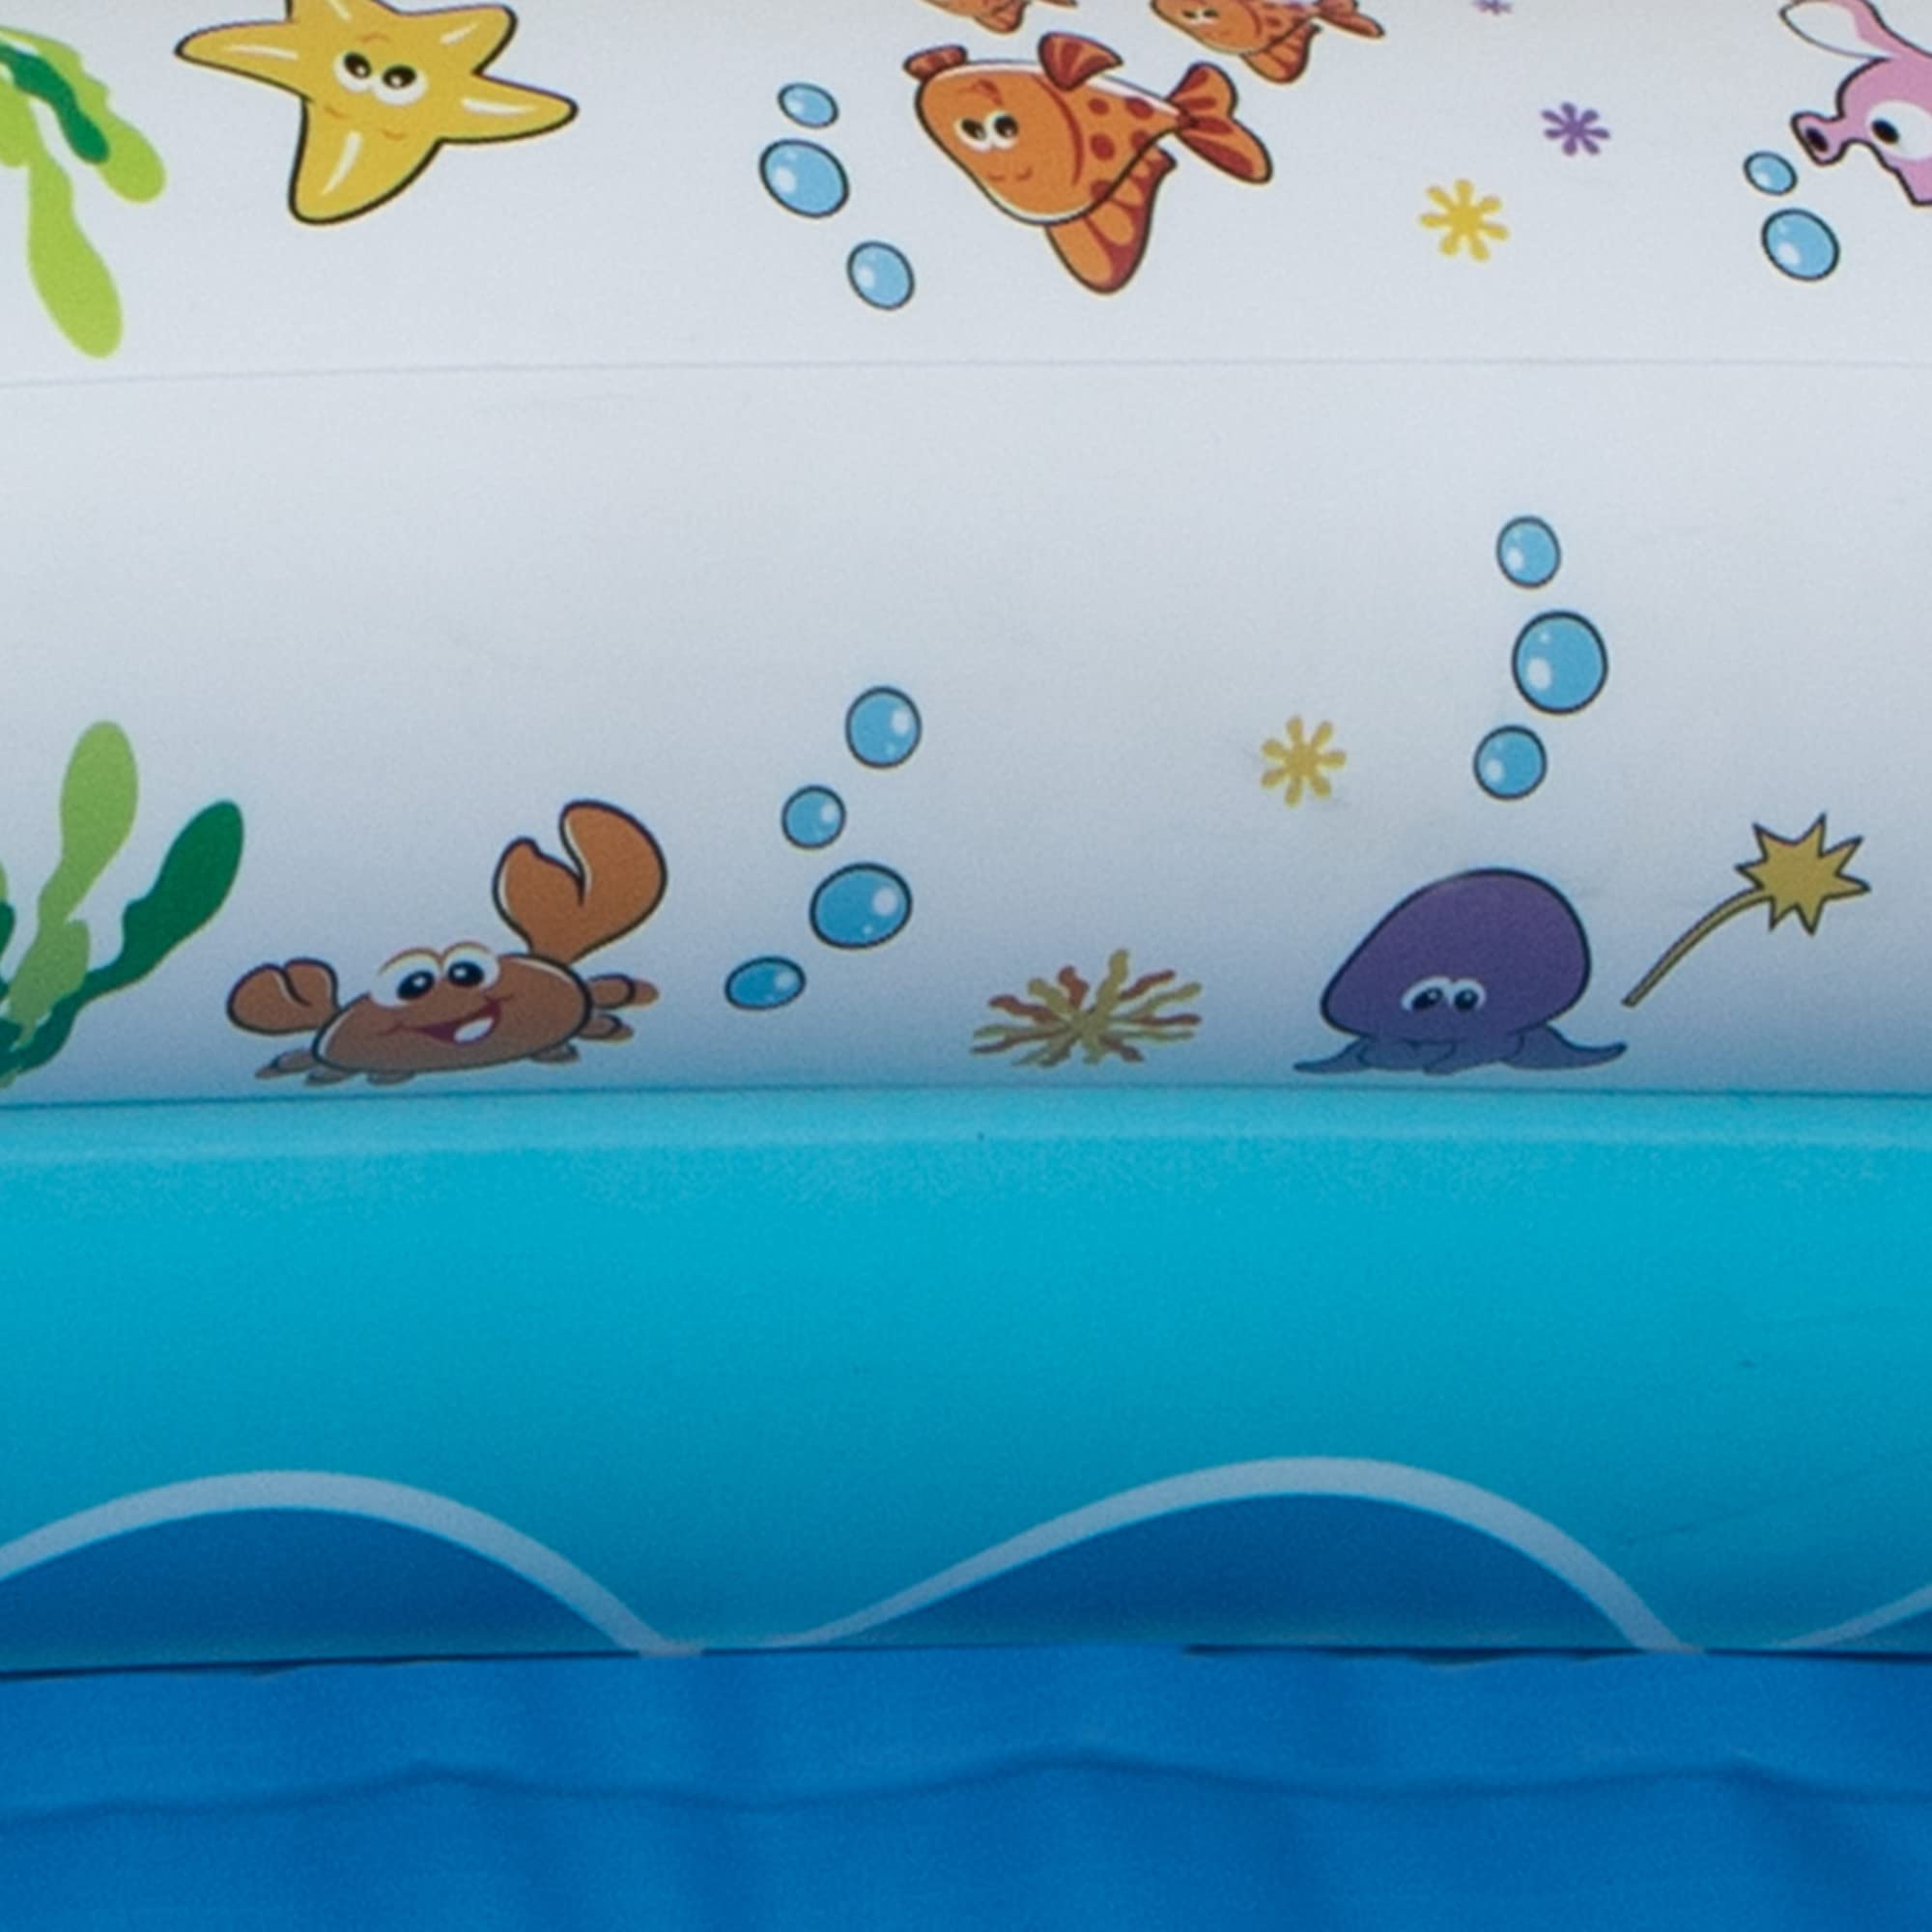 Mommy's Helper Inflatable Bathtub for Baby & Toddler; Saddle Horn Baby Bath Seat Keeps Baby from Sliding; Whimsical Ocean Design Makes Toddler Bath time Fun; Recommended Age 6 to 24 Months